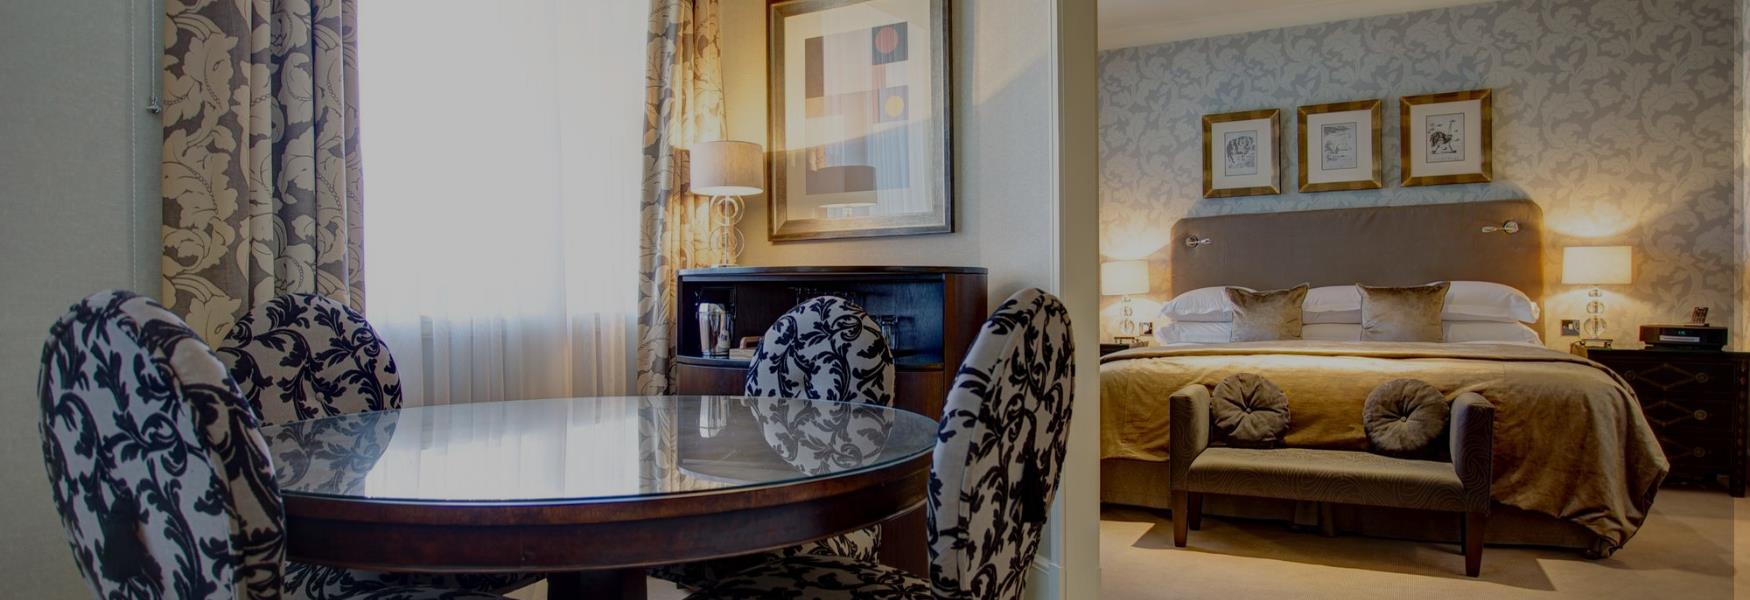 Luxury Hotels in Chester and Cheshire